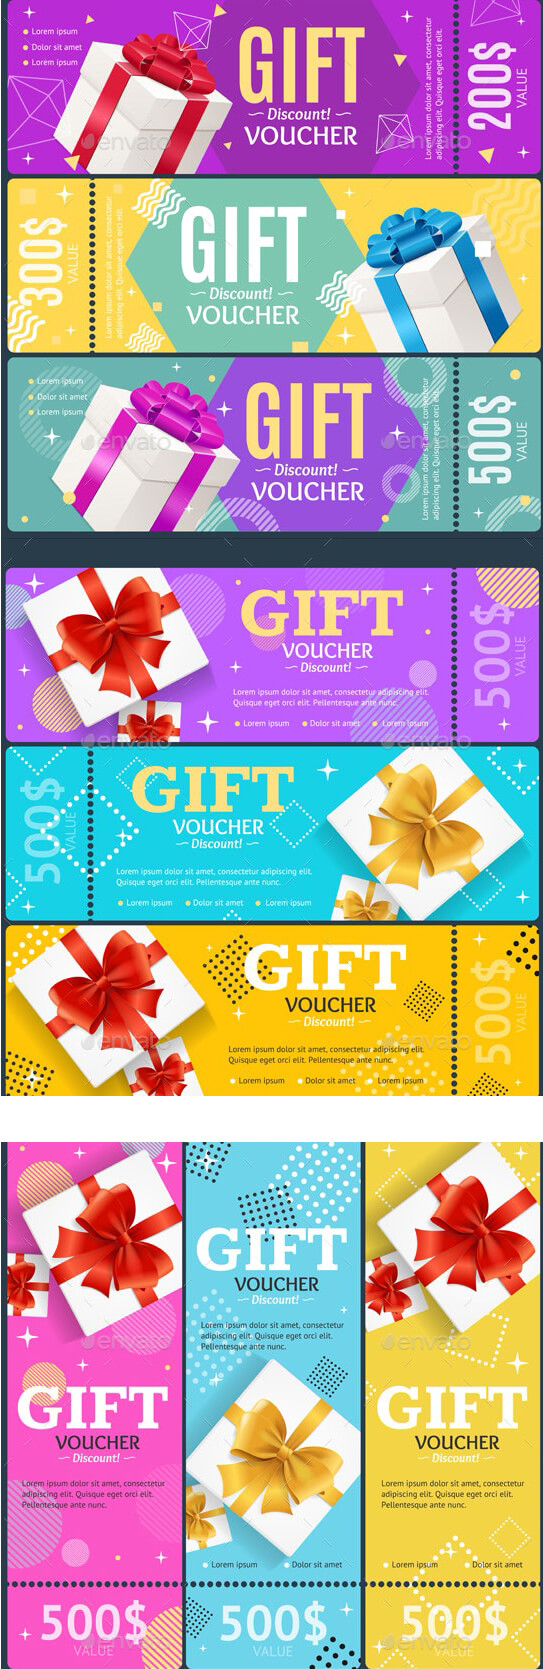 10-free-gift-coupon-templates-for-anything-word-psd-ai